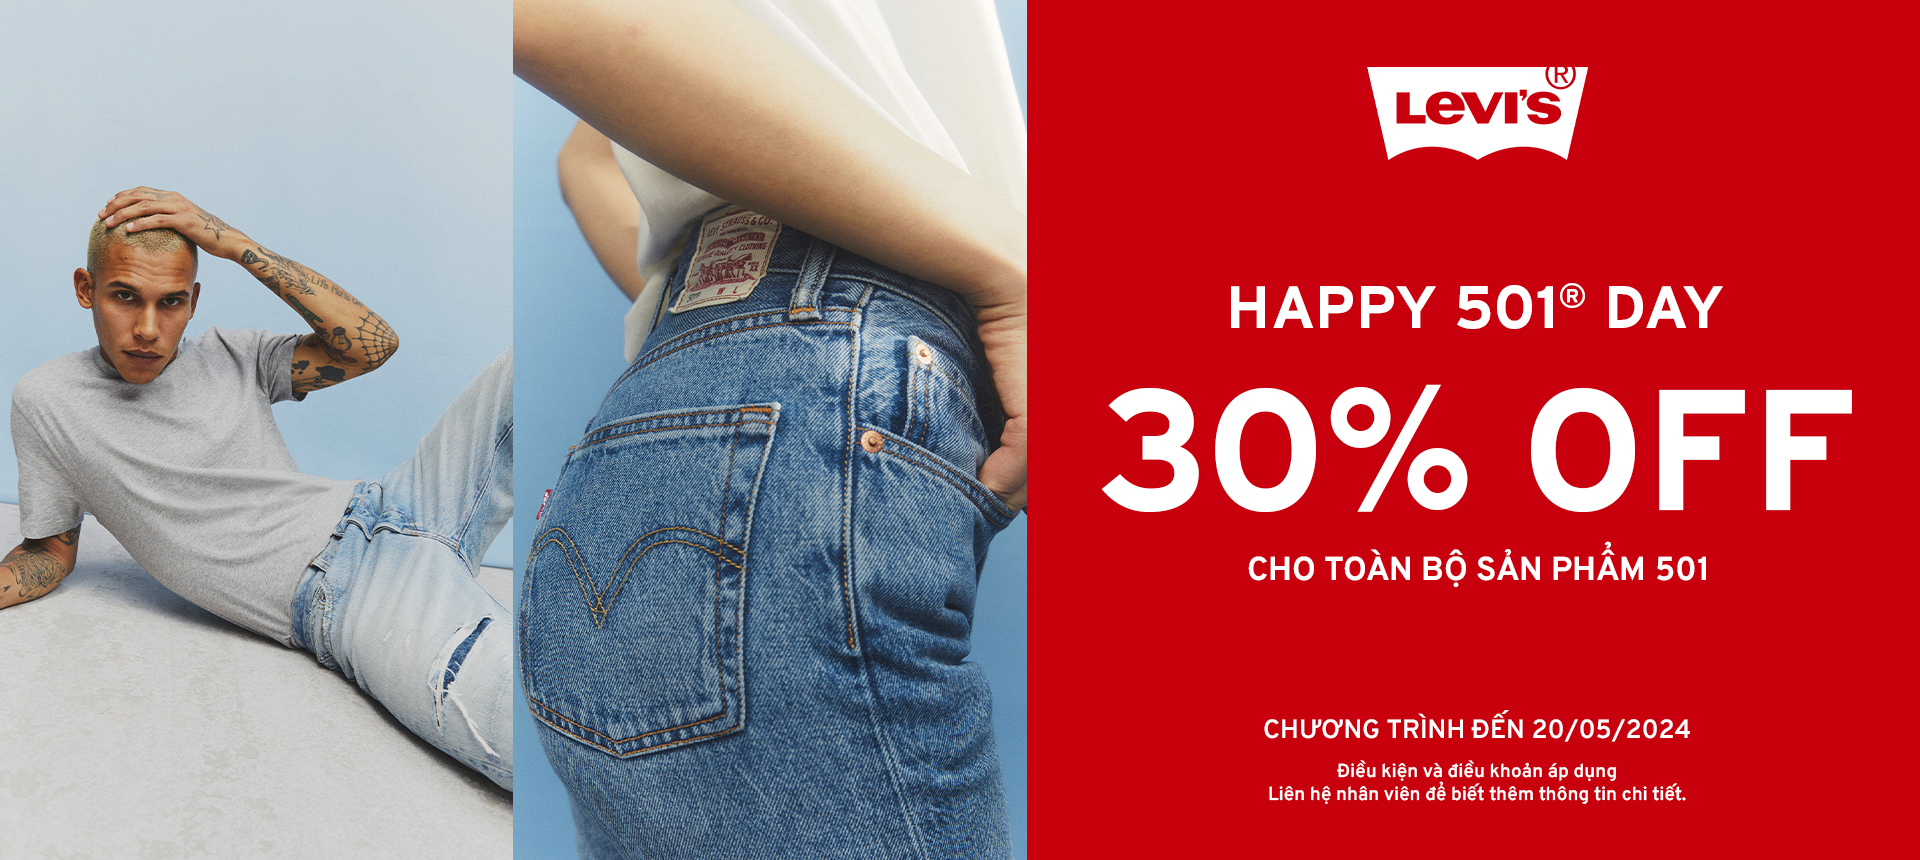 EXCLUSIVE DEALS FOR EXCLUSIVE LEVI'S 501 DAY